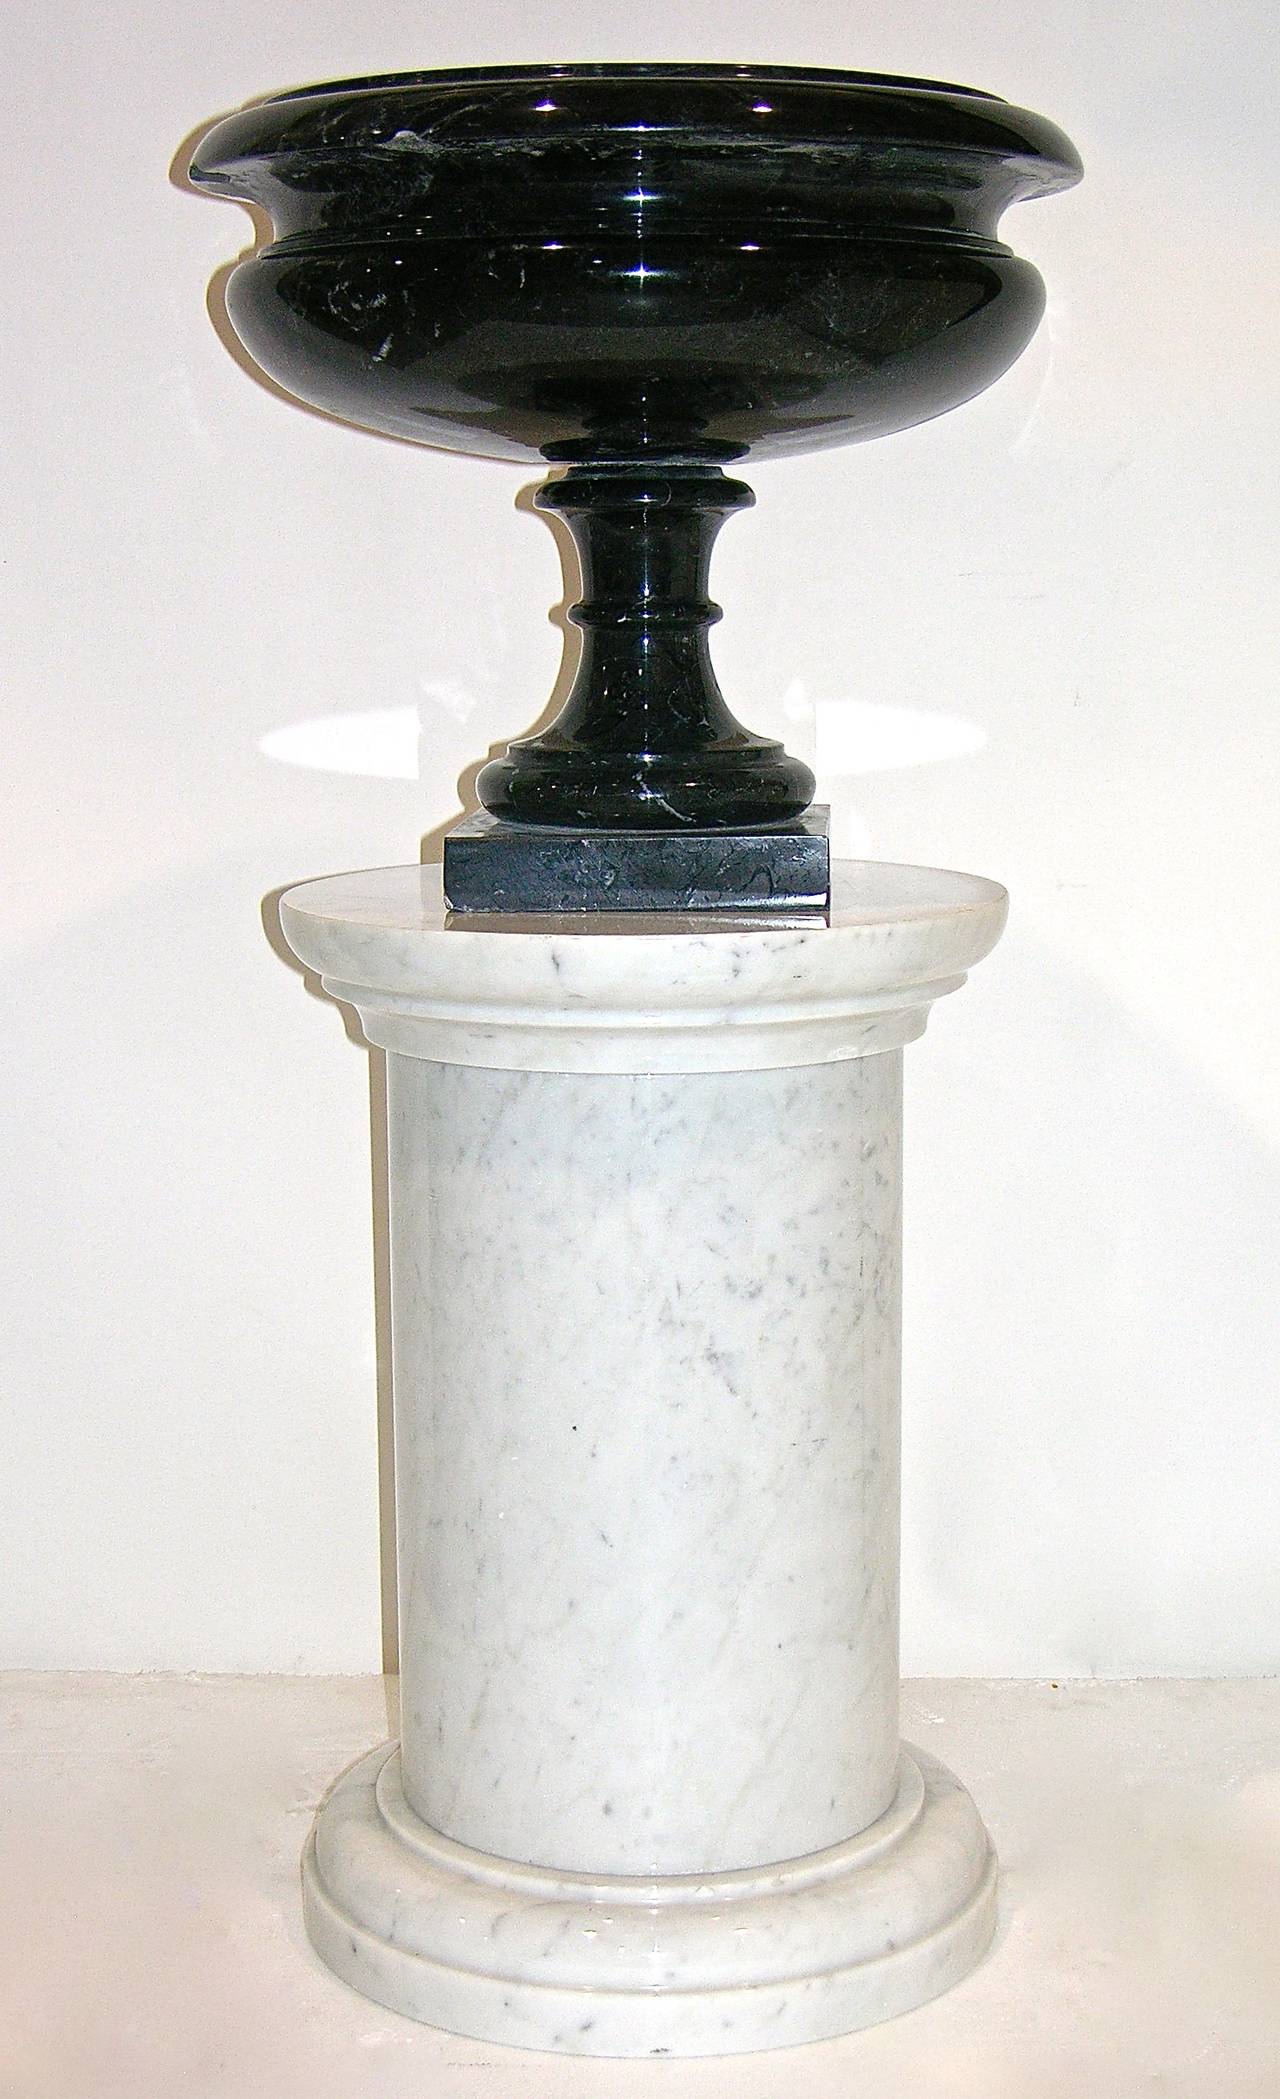 An exceptional and rare pair of black and white garden planters on stands, late Art Deco Design circa 1940, the urns are in hand-turned black Marquina marble and the columns are in hand-turned white Carrara marble.
The pair of columns and pair of